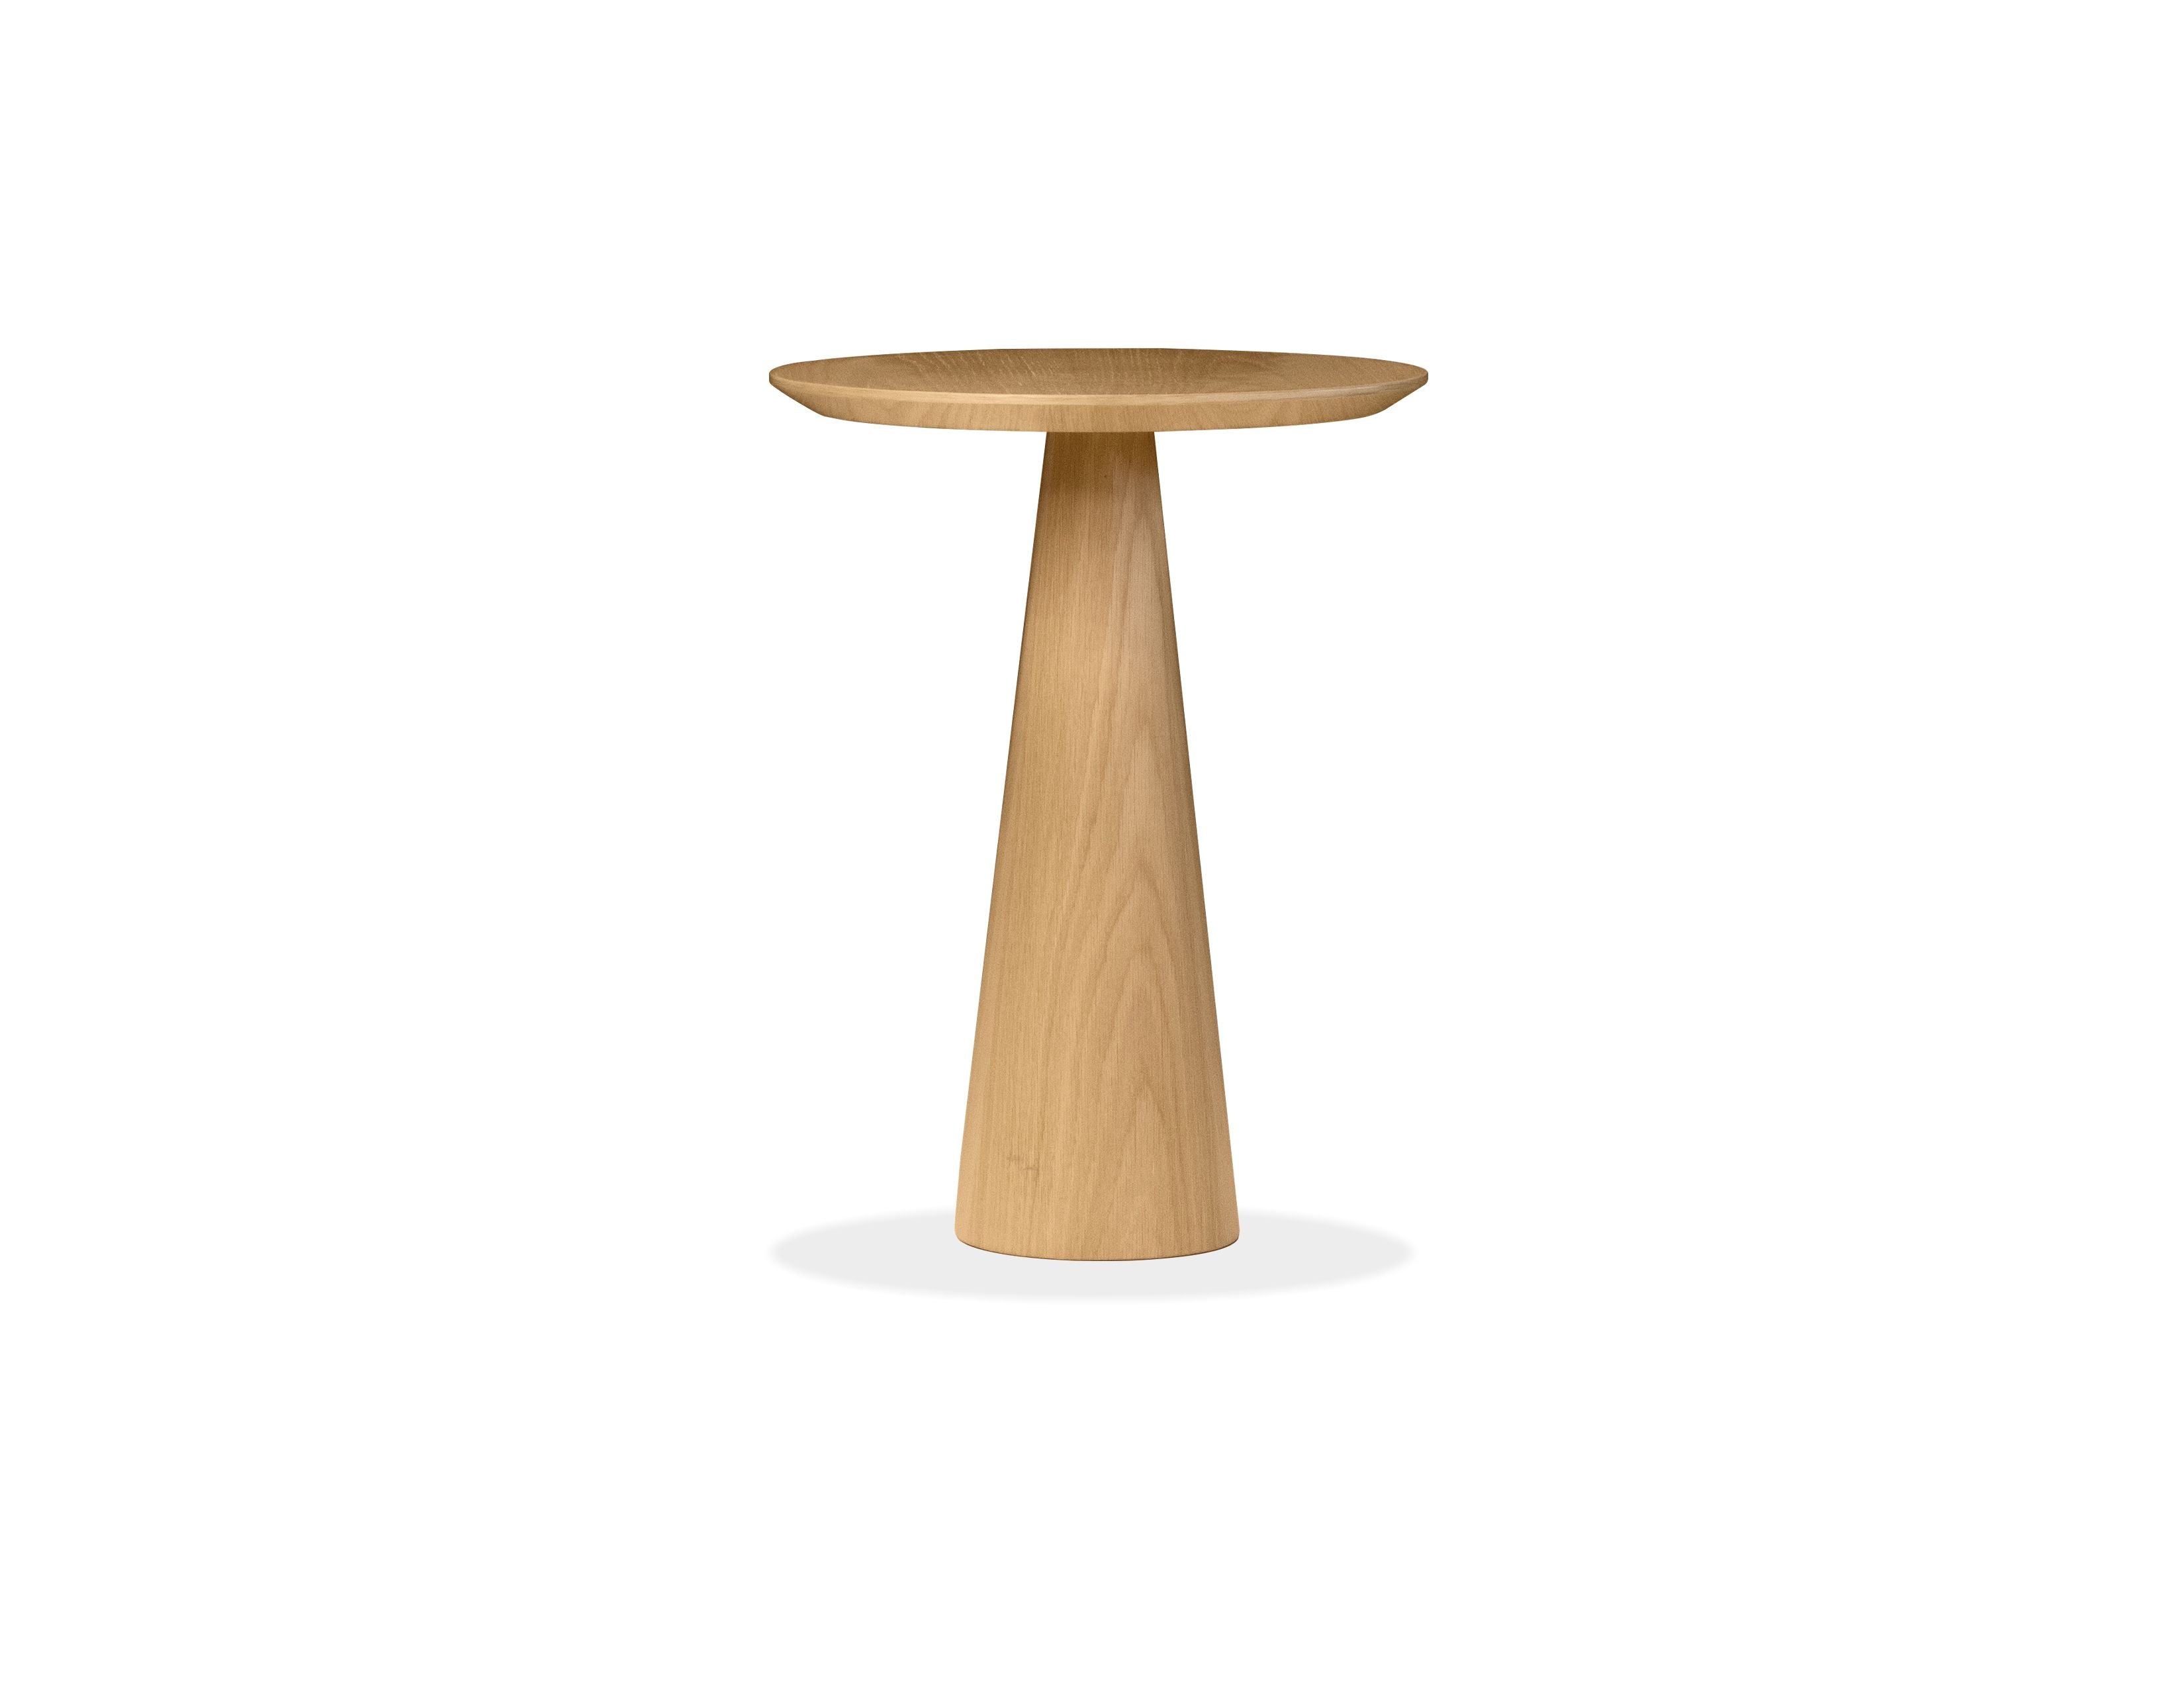 TOWER END table in Natural White Oak